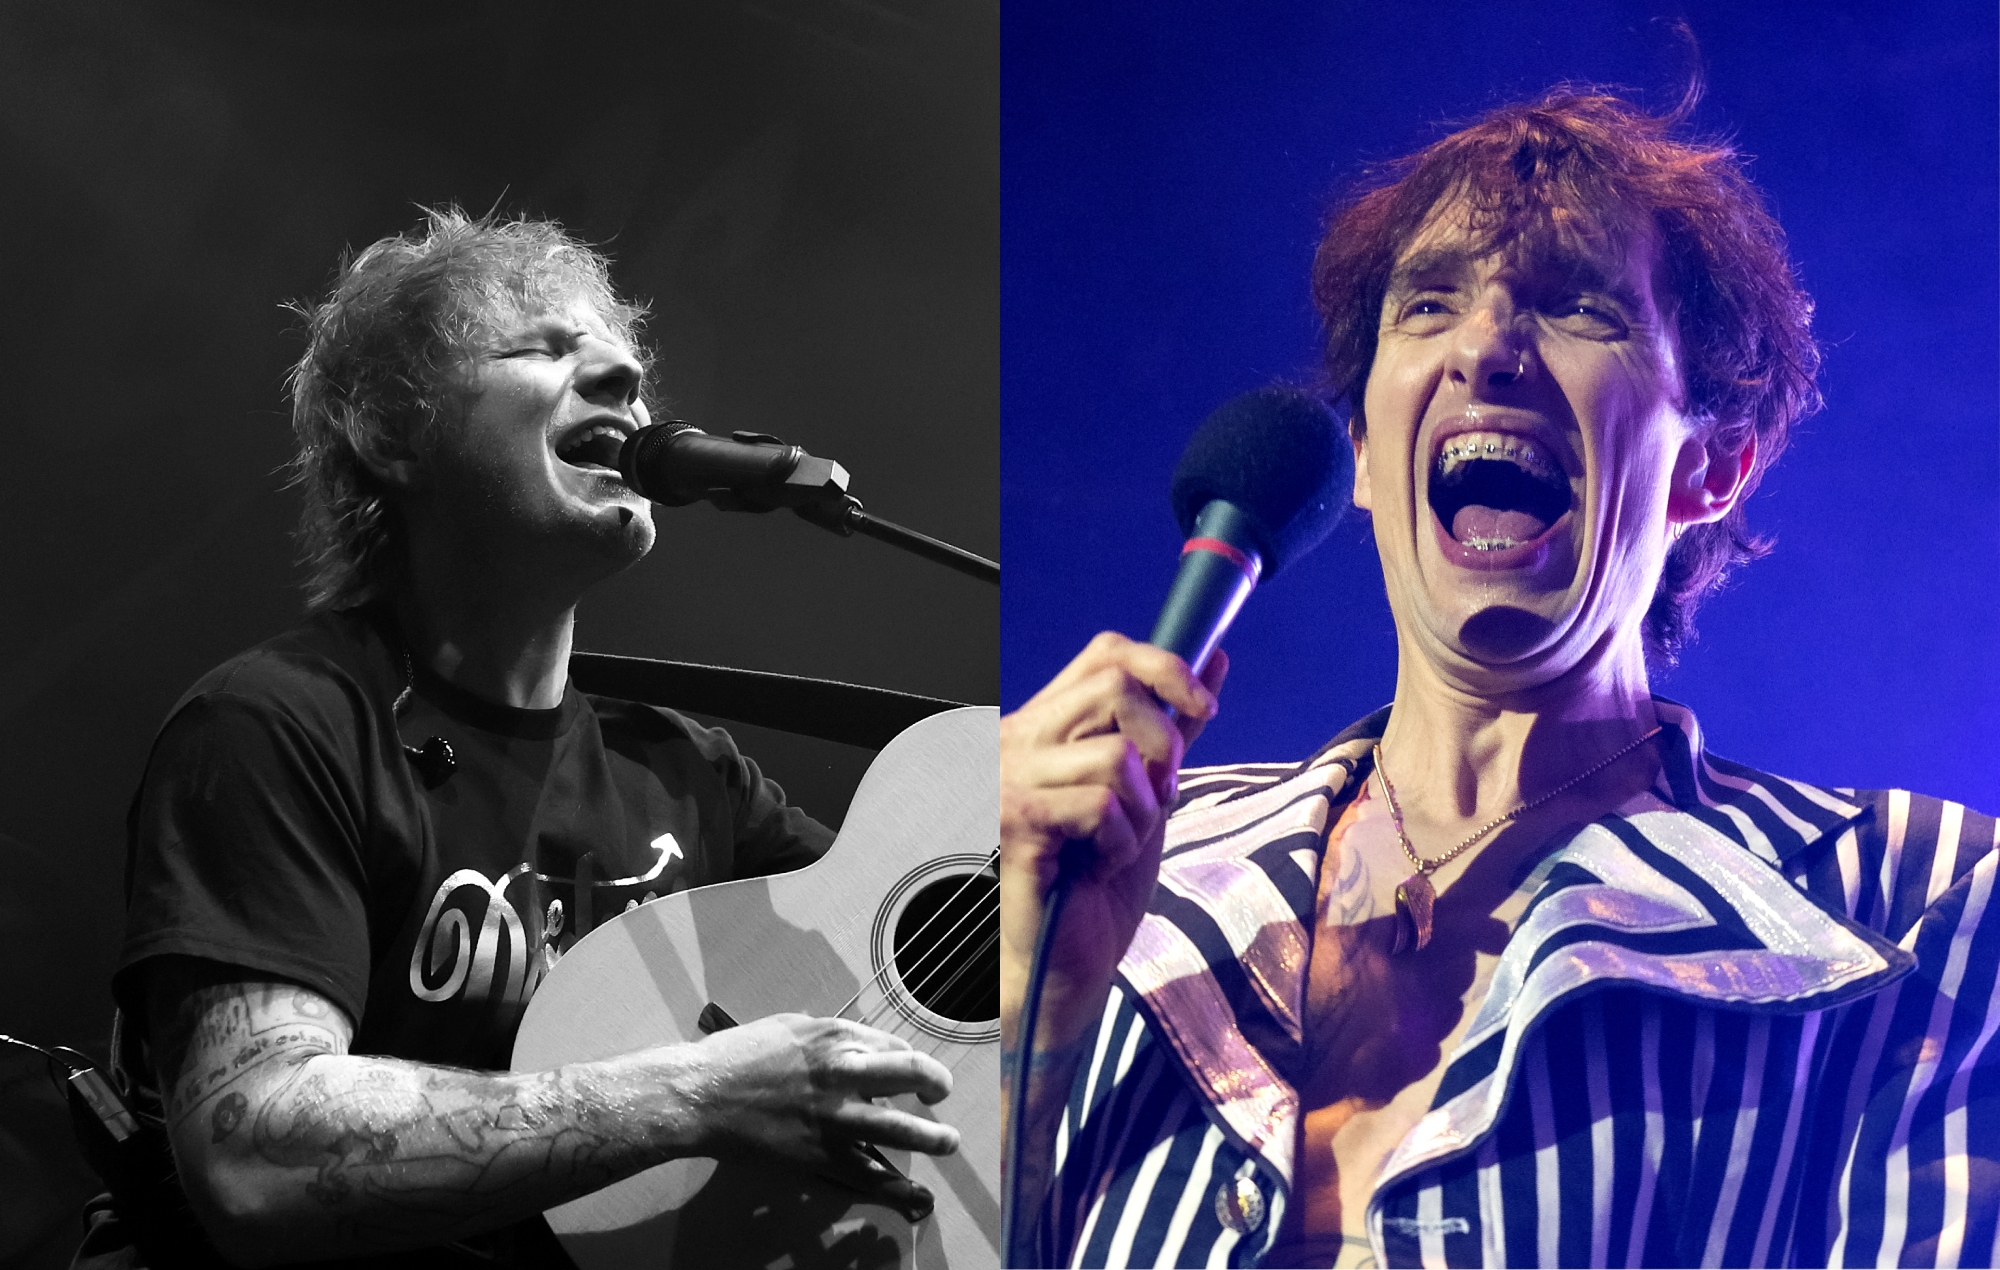 Watch Ed Sheeran play a surprise opening set for The Darkness